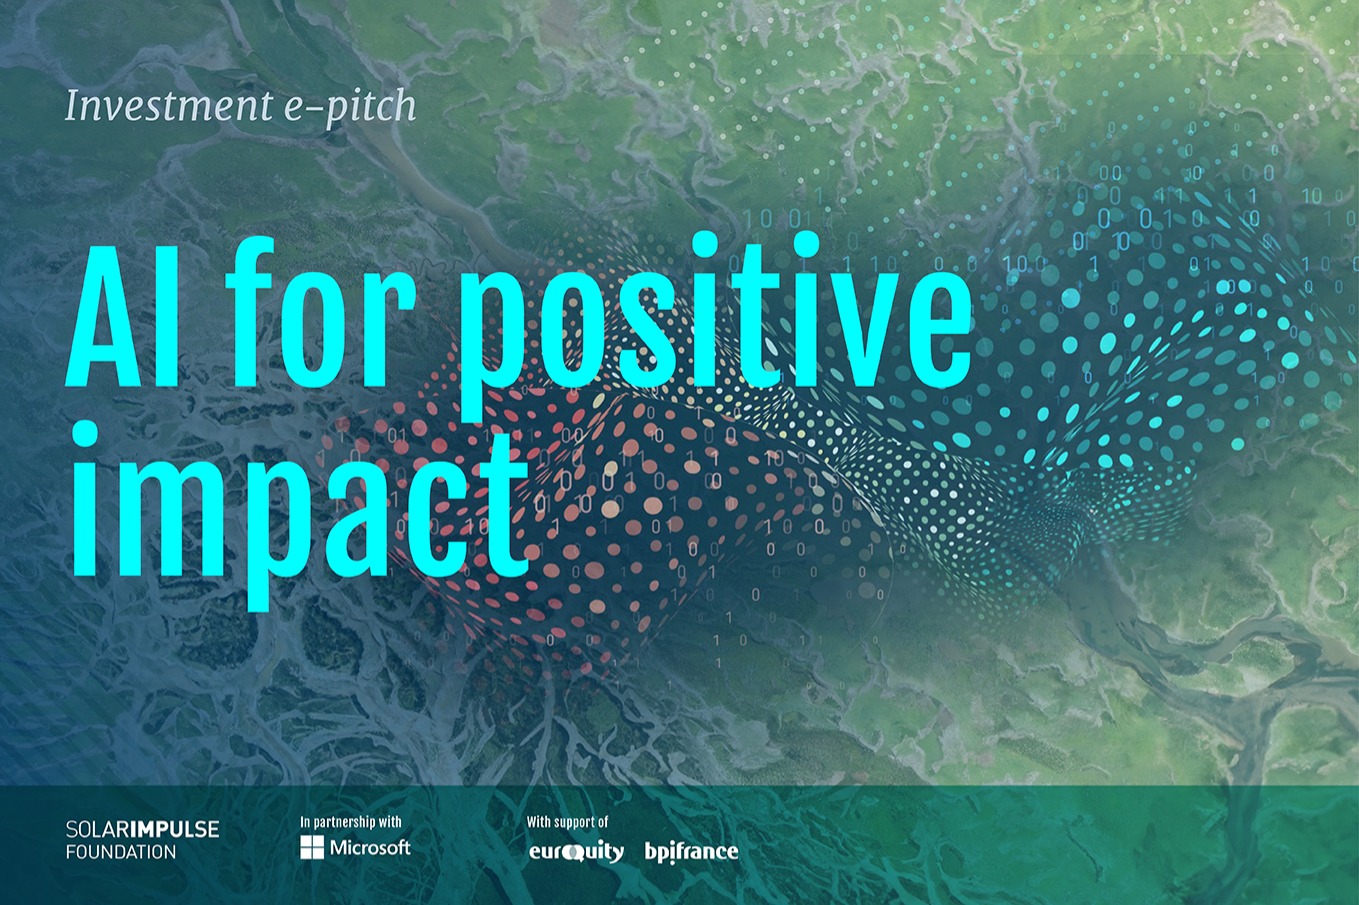 AI for Positive Impact investment e-pitch in partnership with Microsoft